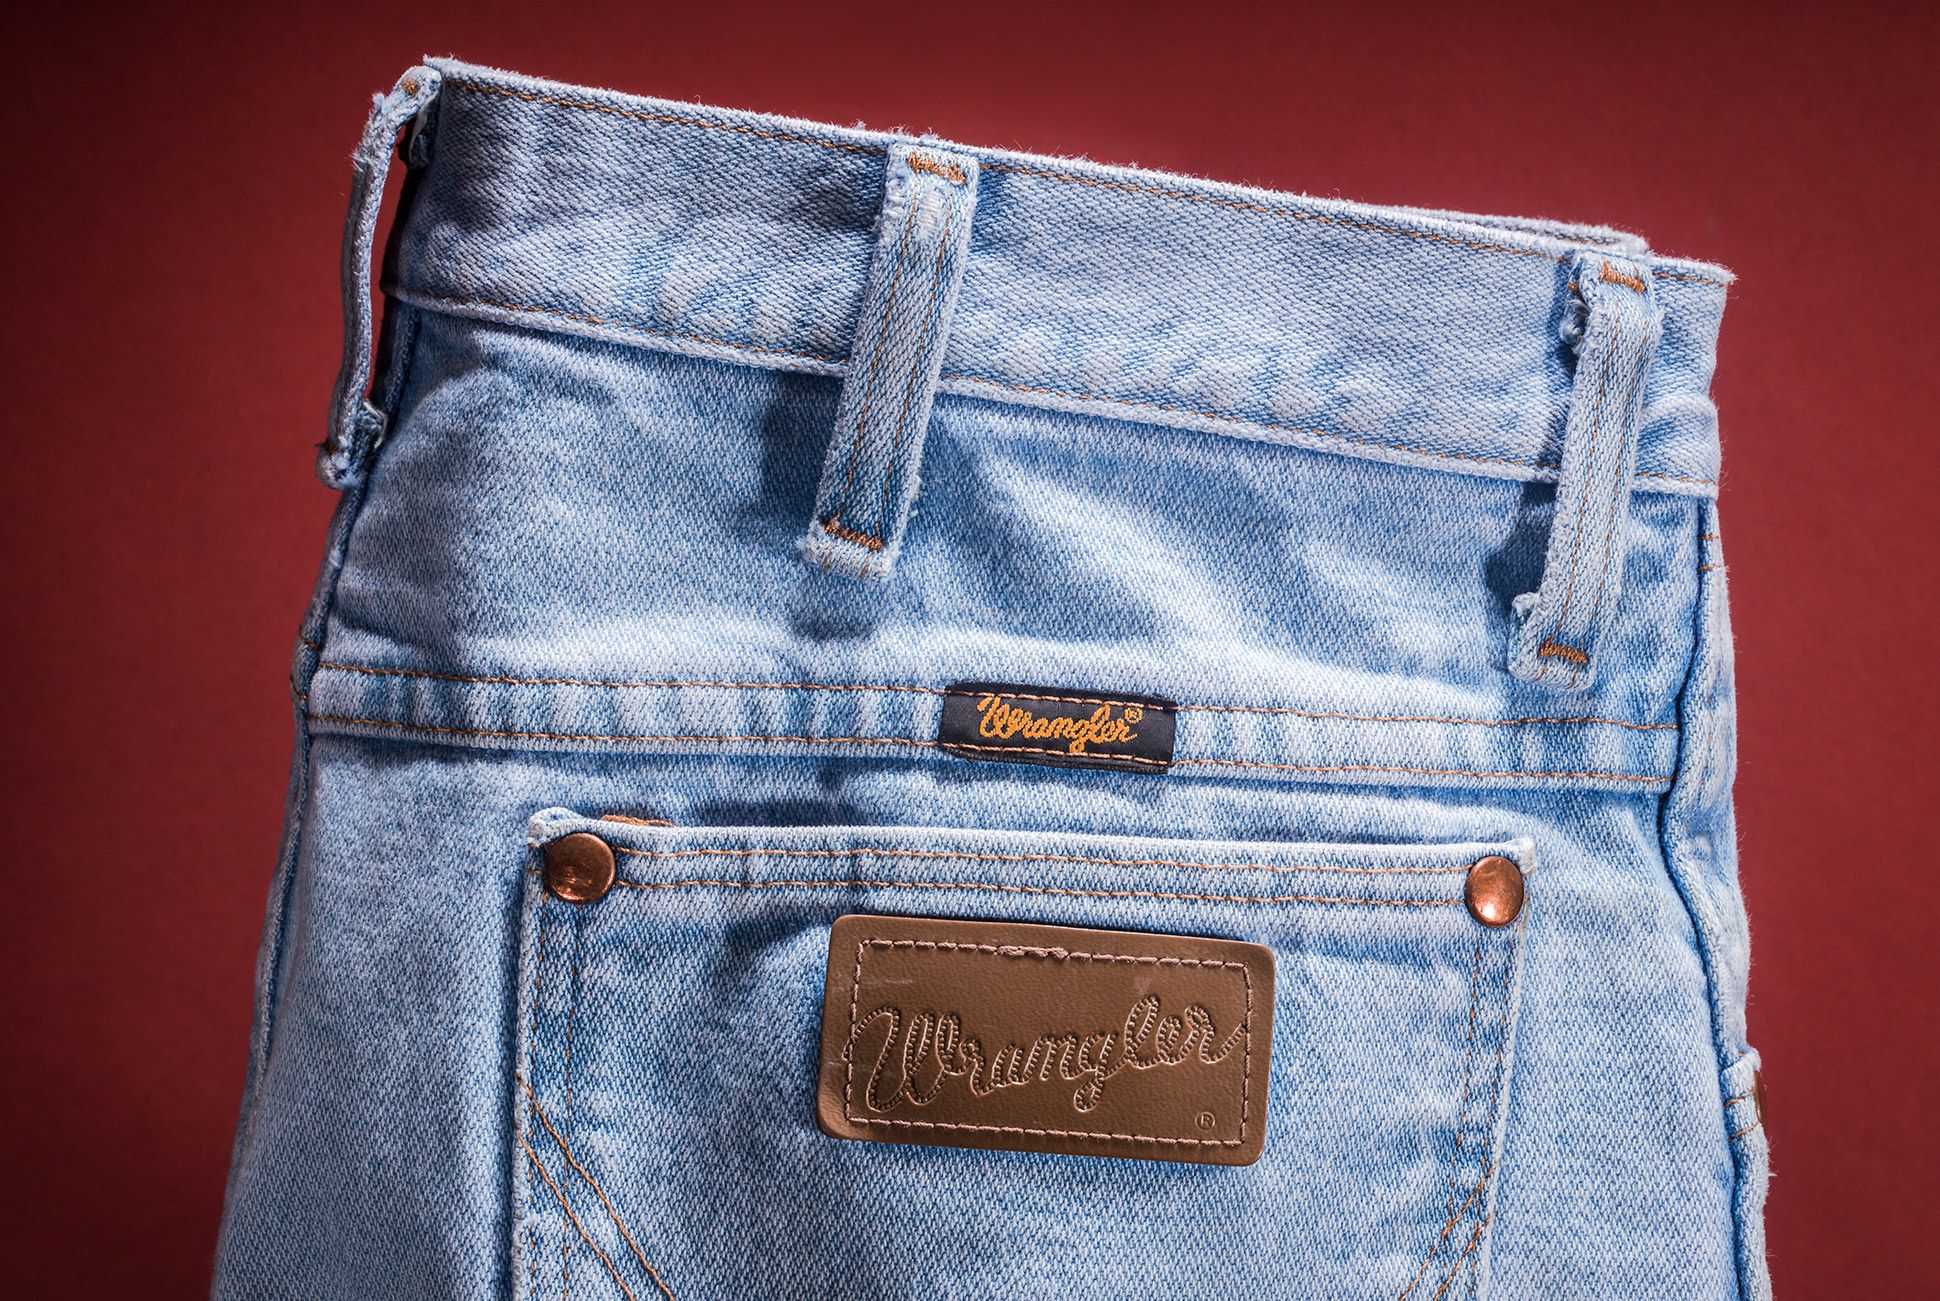 wrangler jeans new collection